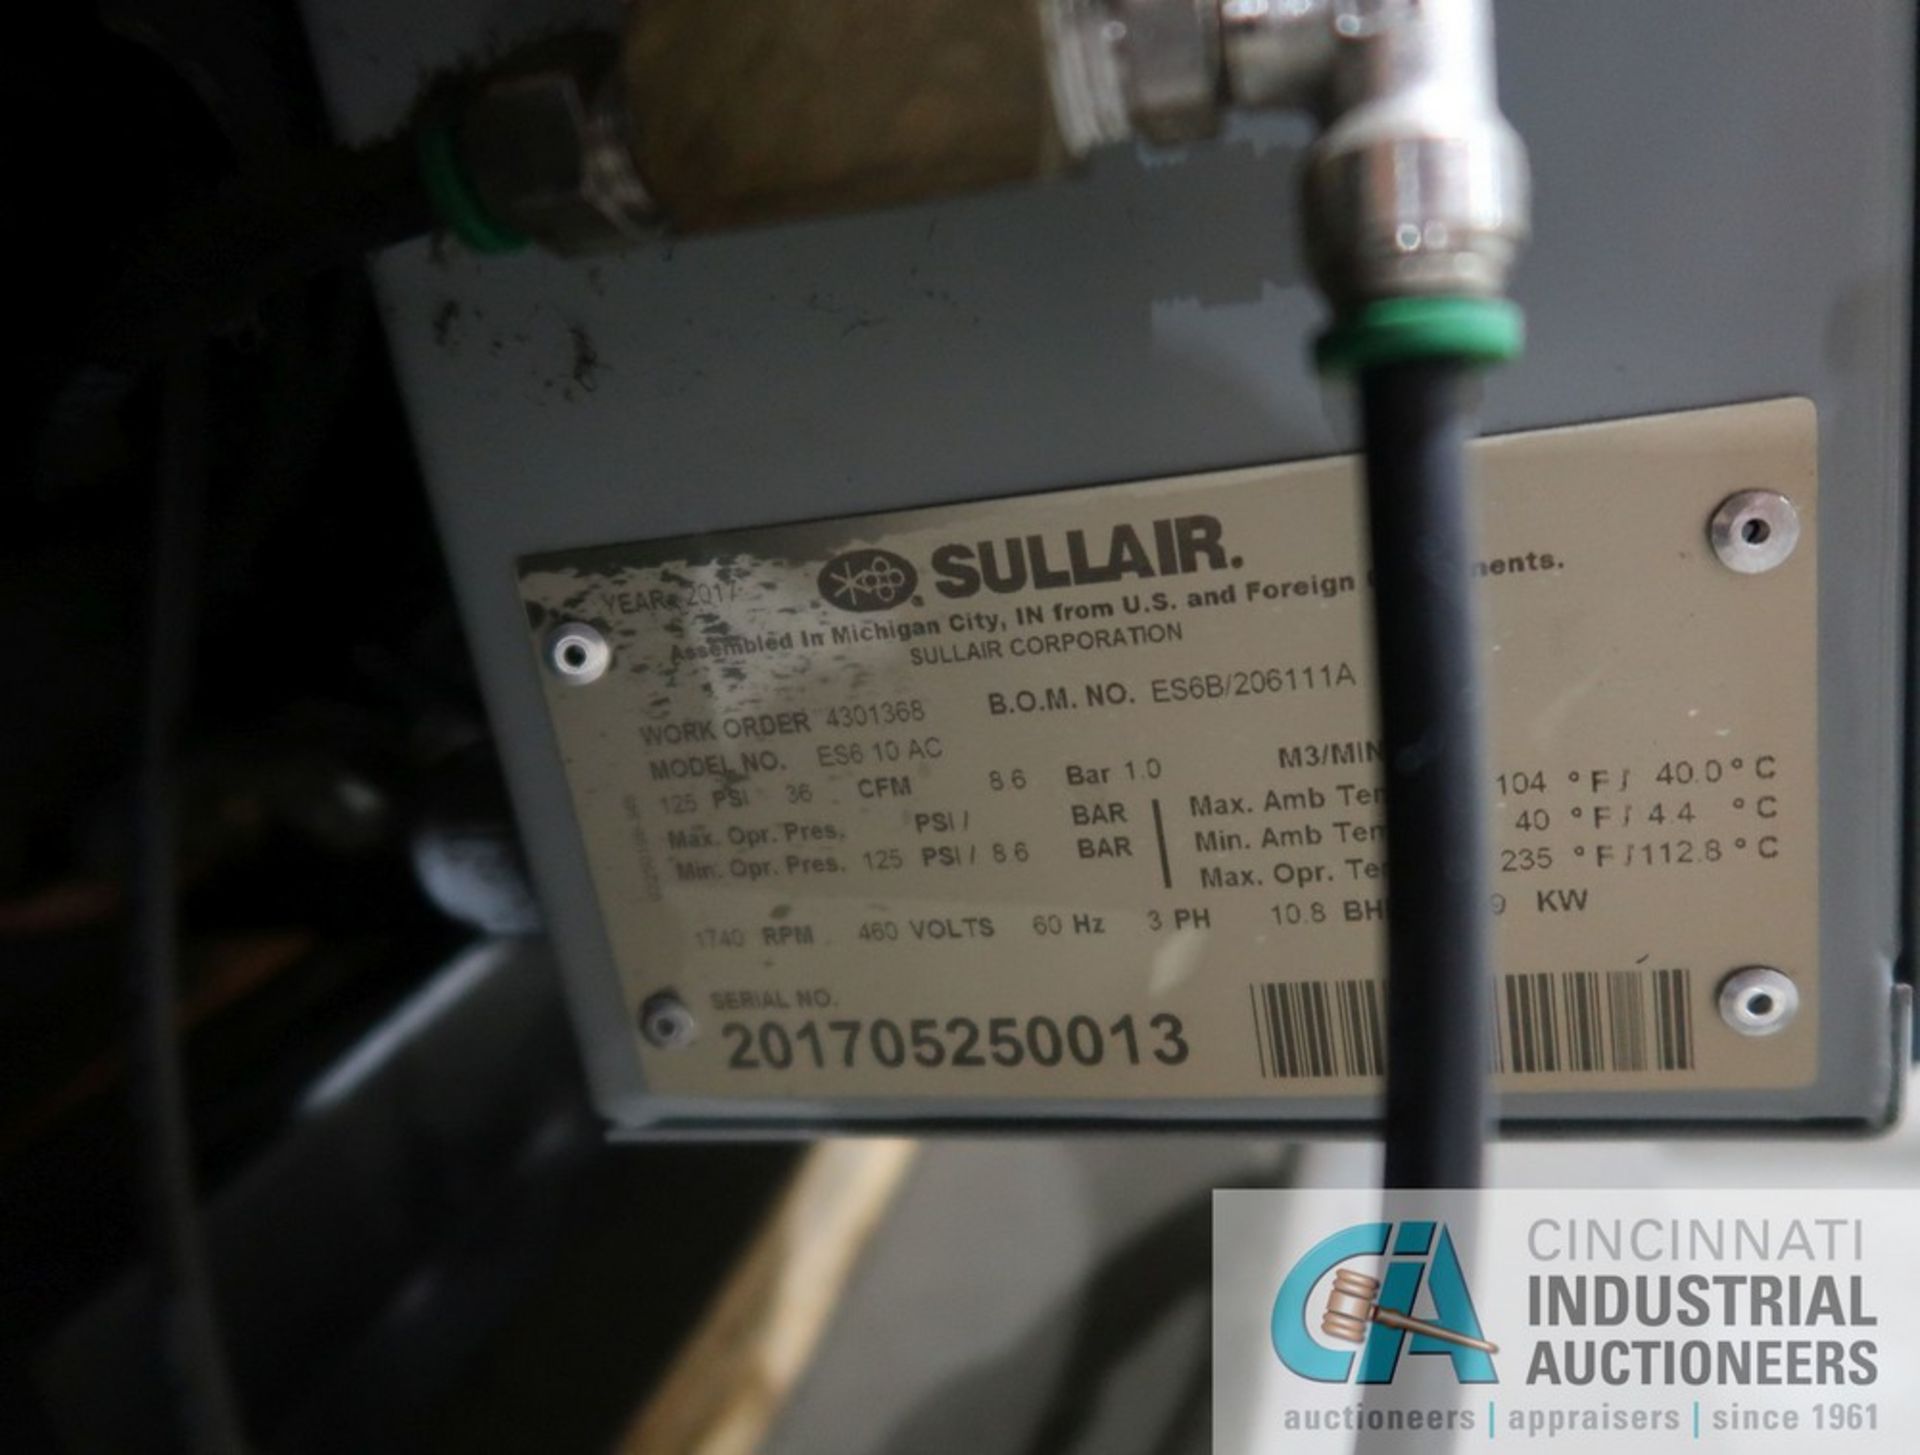 SULLAIR MODEL ES-6 10AC ROTARY SCREW AIR COMPRESSOR; S/N 201705250013, 11,969 HOURS SHOWING **For - Image 2 of 3